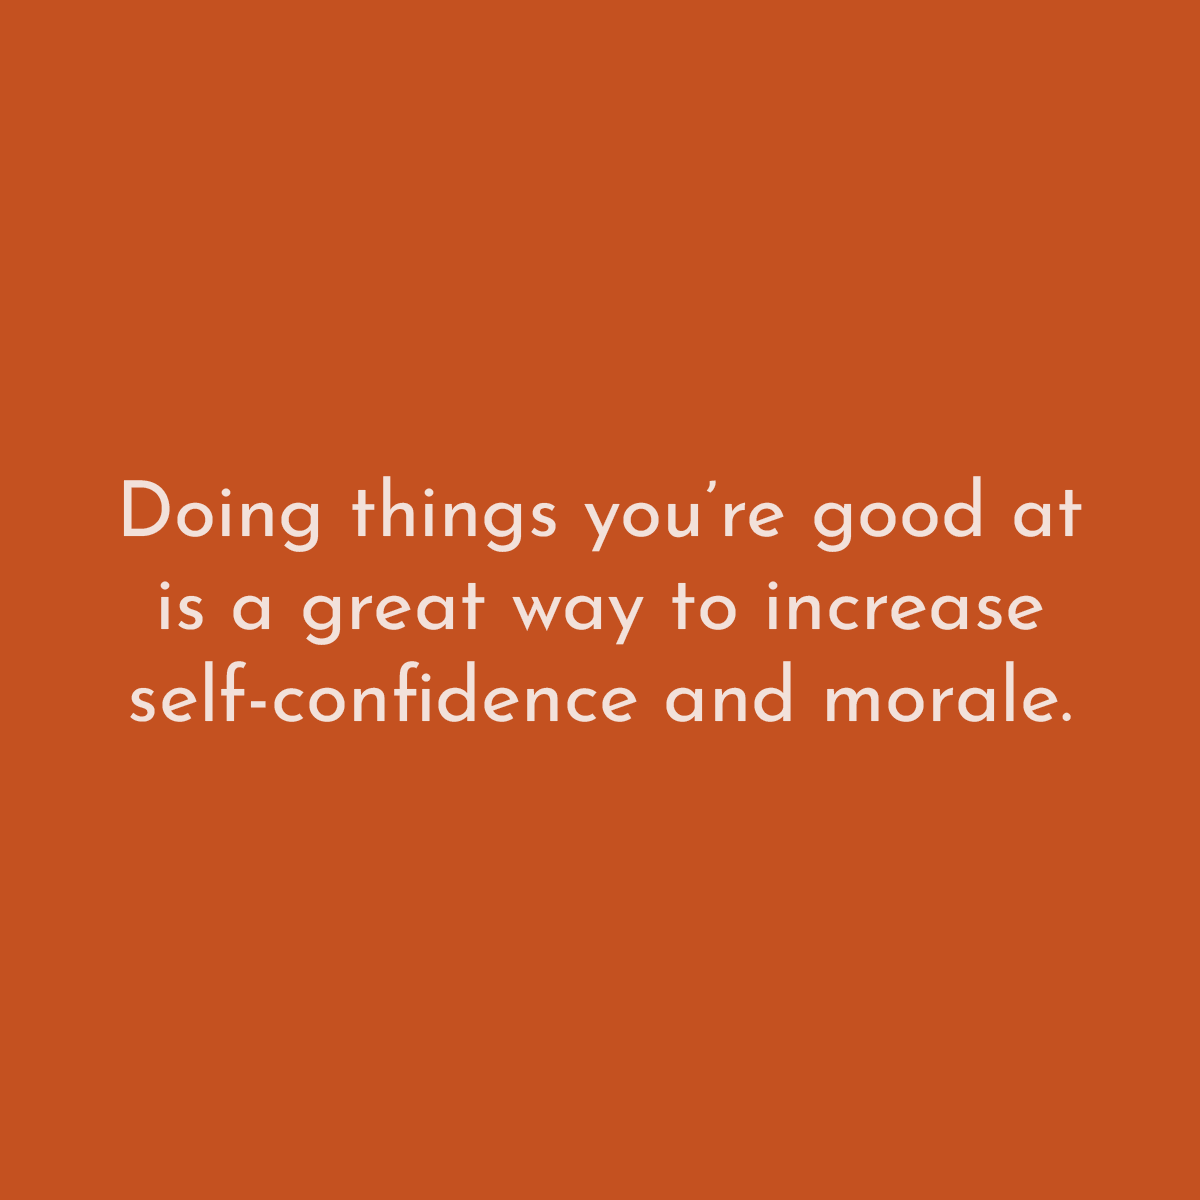 Doing things you're good at is a great way to increase self-confidence and morale.